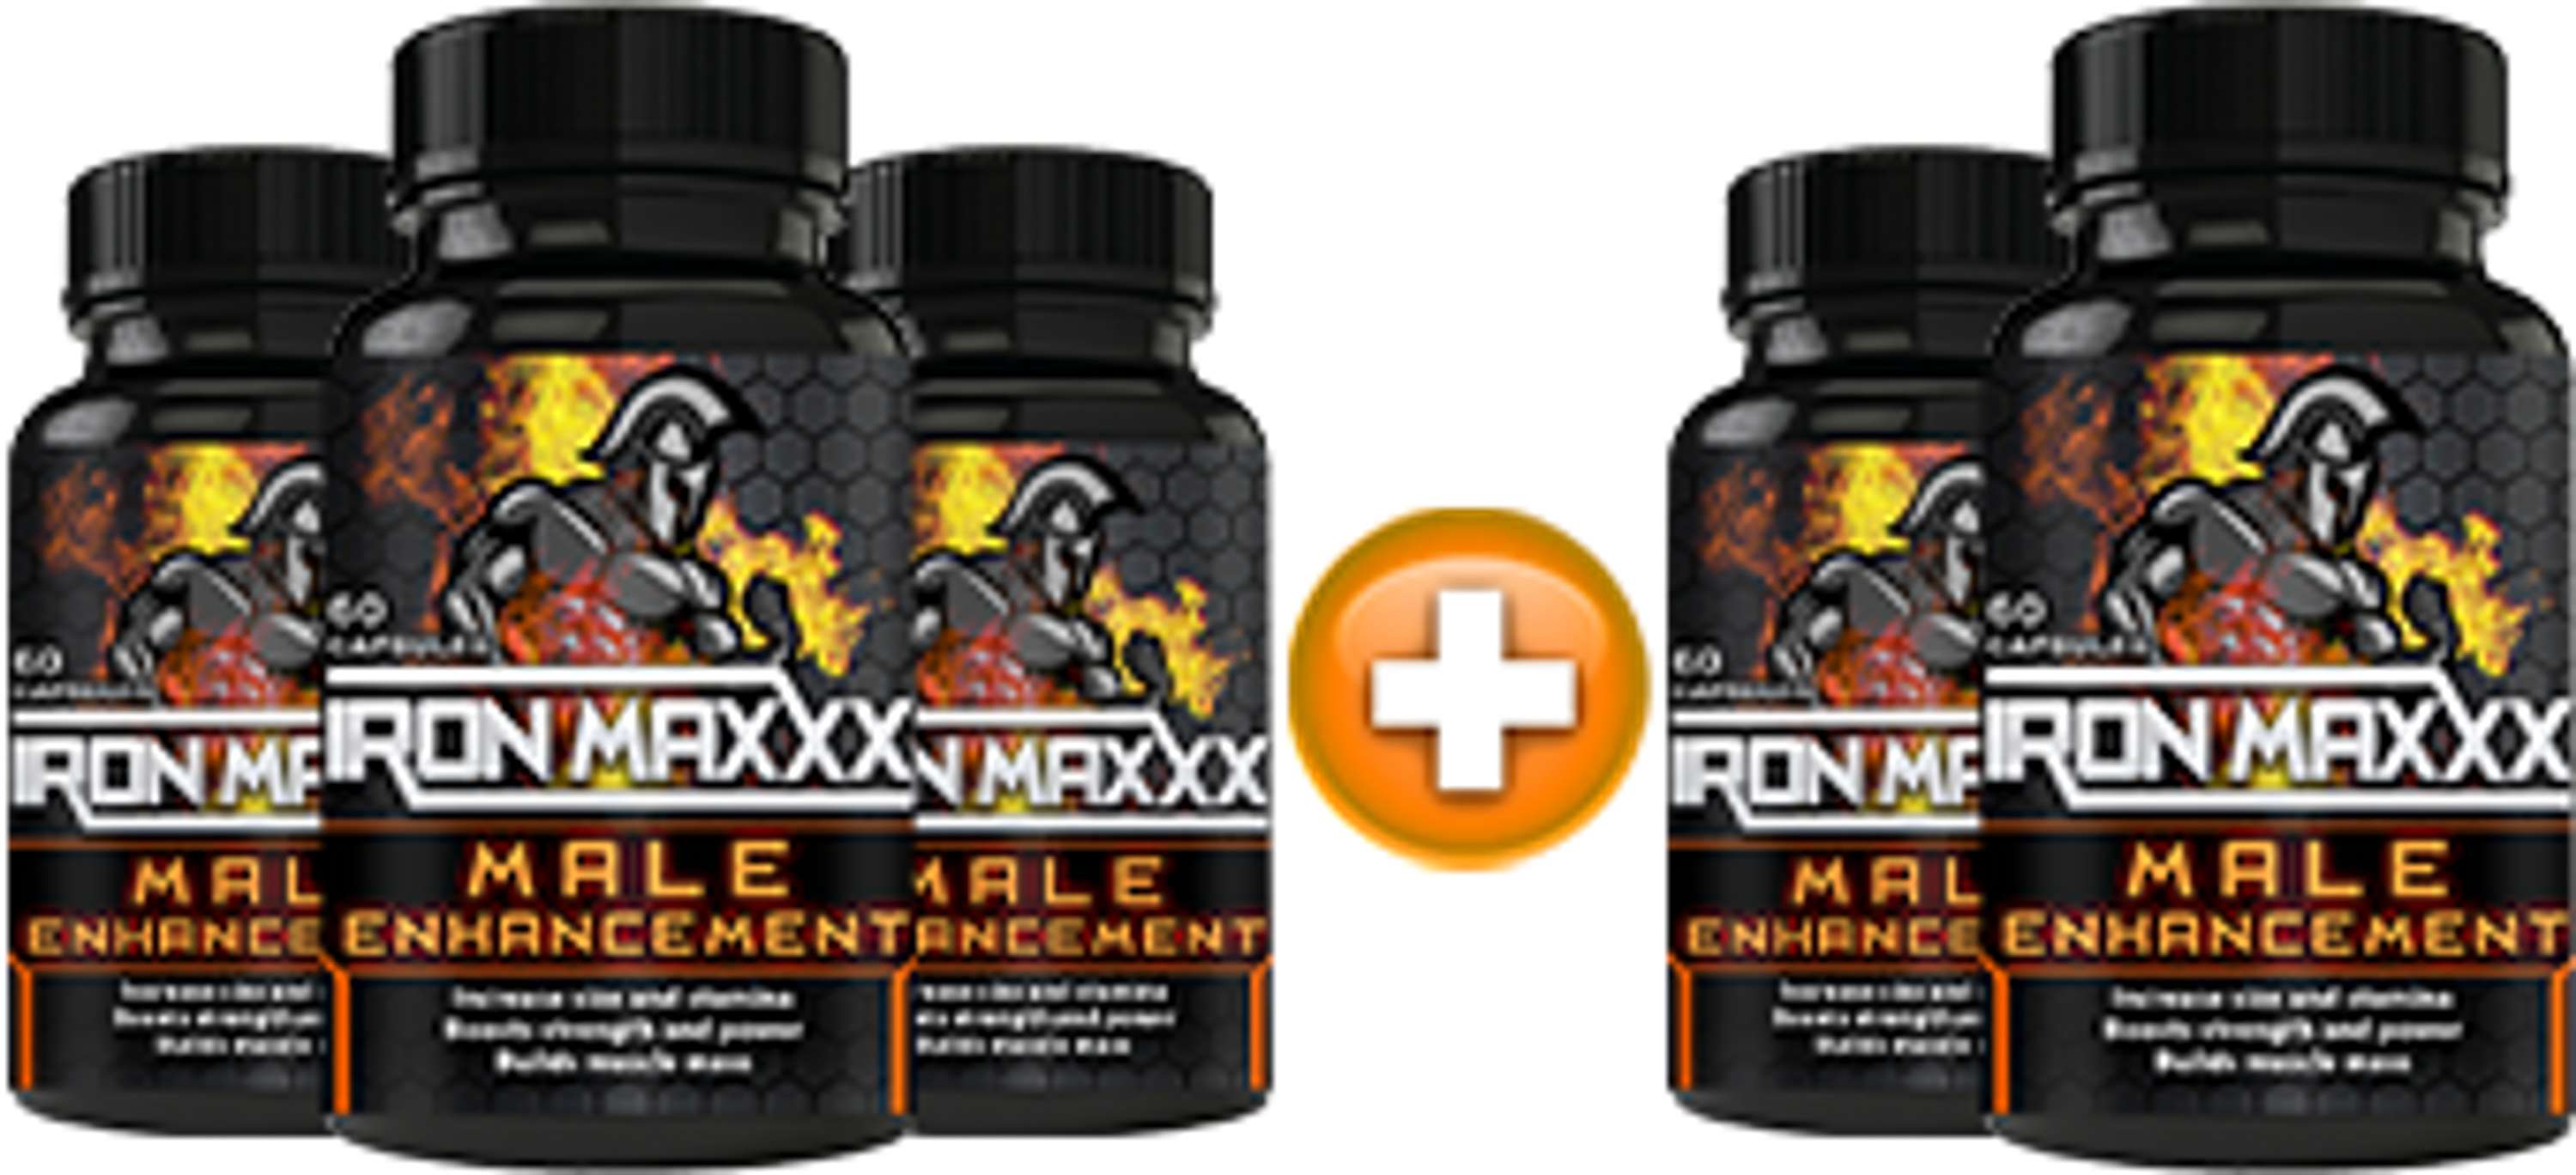 IRON MAXXX Male Enhancement [Pros & Cons] Reviews Pills Price and Shark  Tank Warning! | The Dots